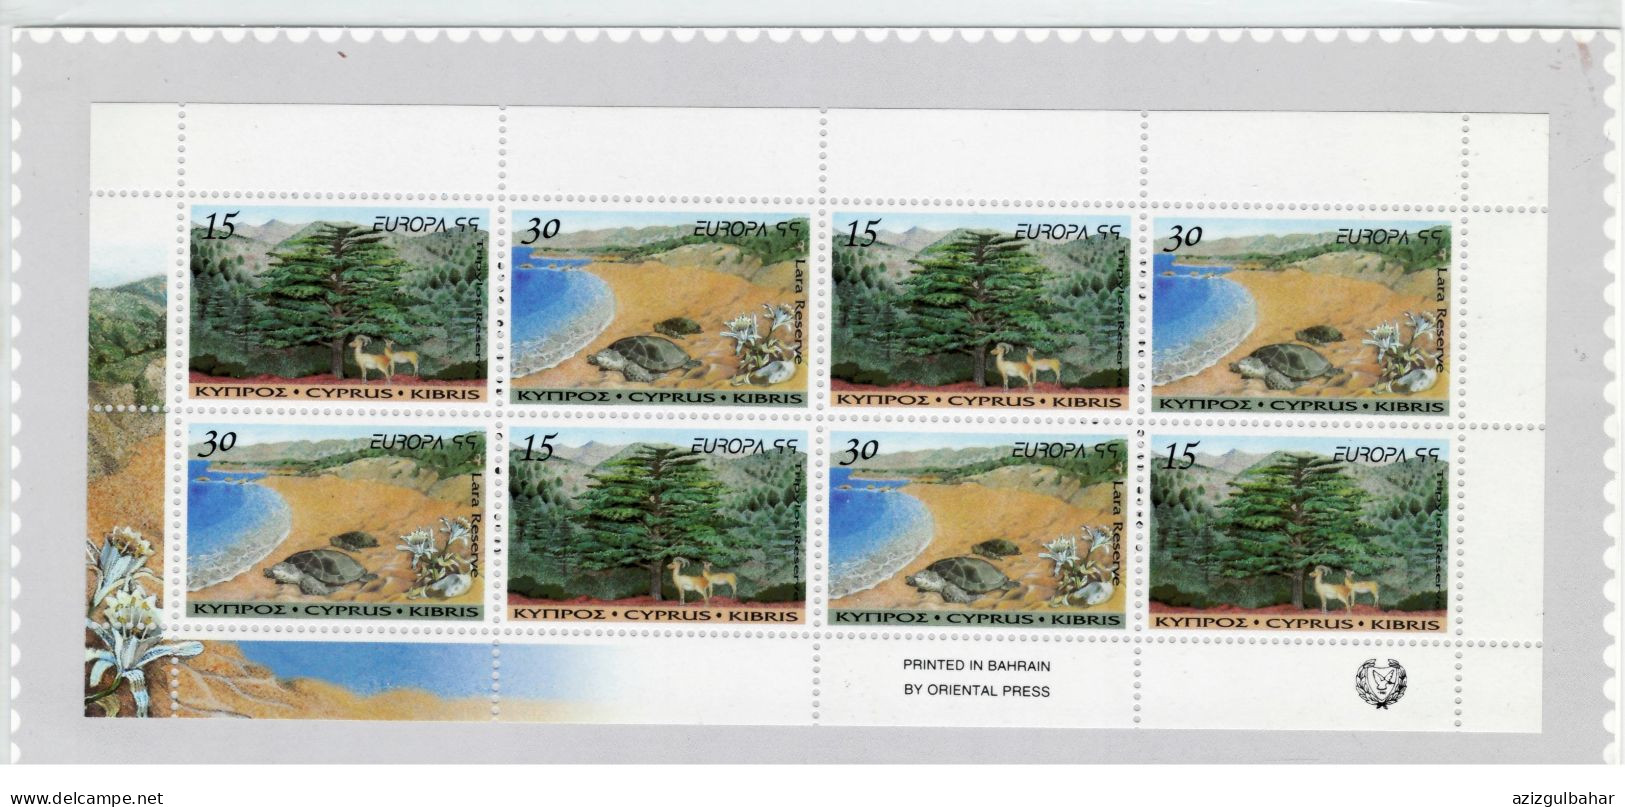 CYPRUS STAMPS - EUROPA - UMM - 1999 BOOKLET - 1999